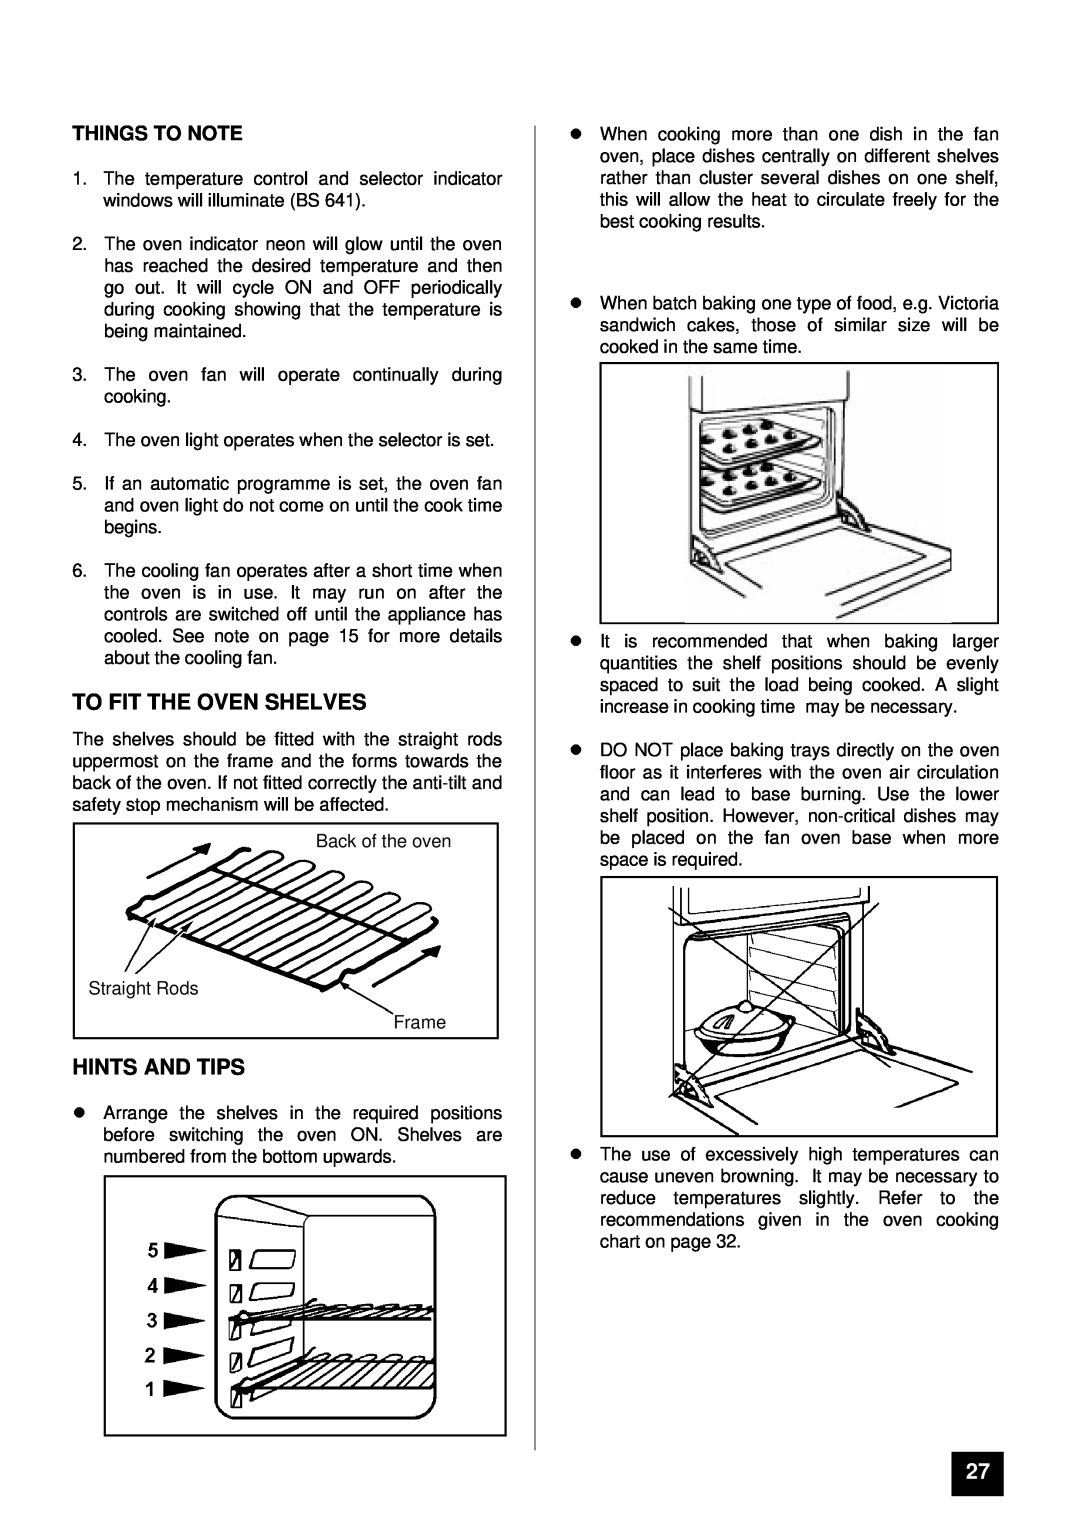 Tricity Bendix BS 631/2 installation instructions To Fit The Oven Shelves, lHINTS AND TIPS, Things To Note 